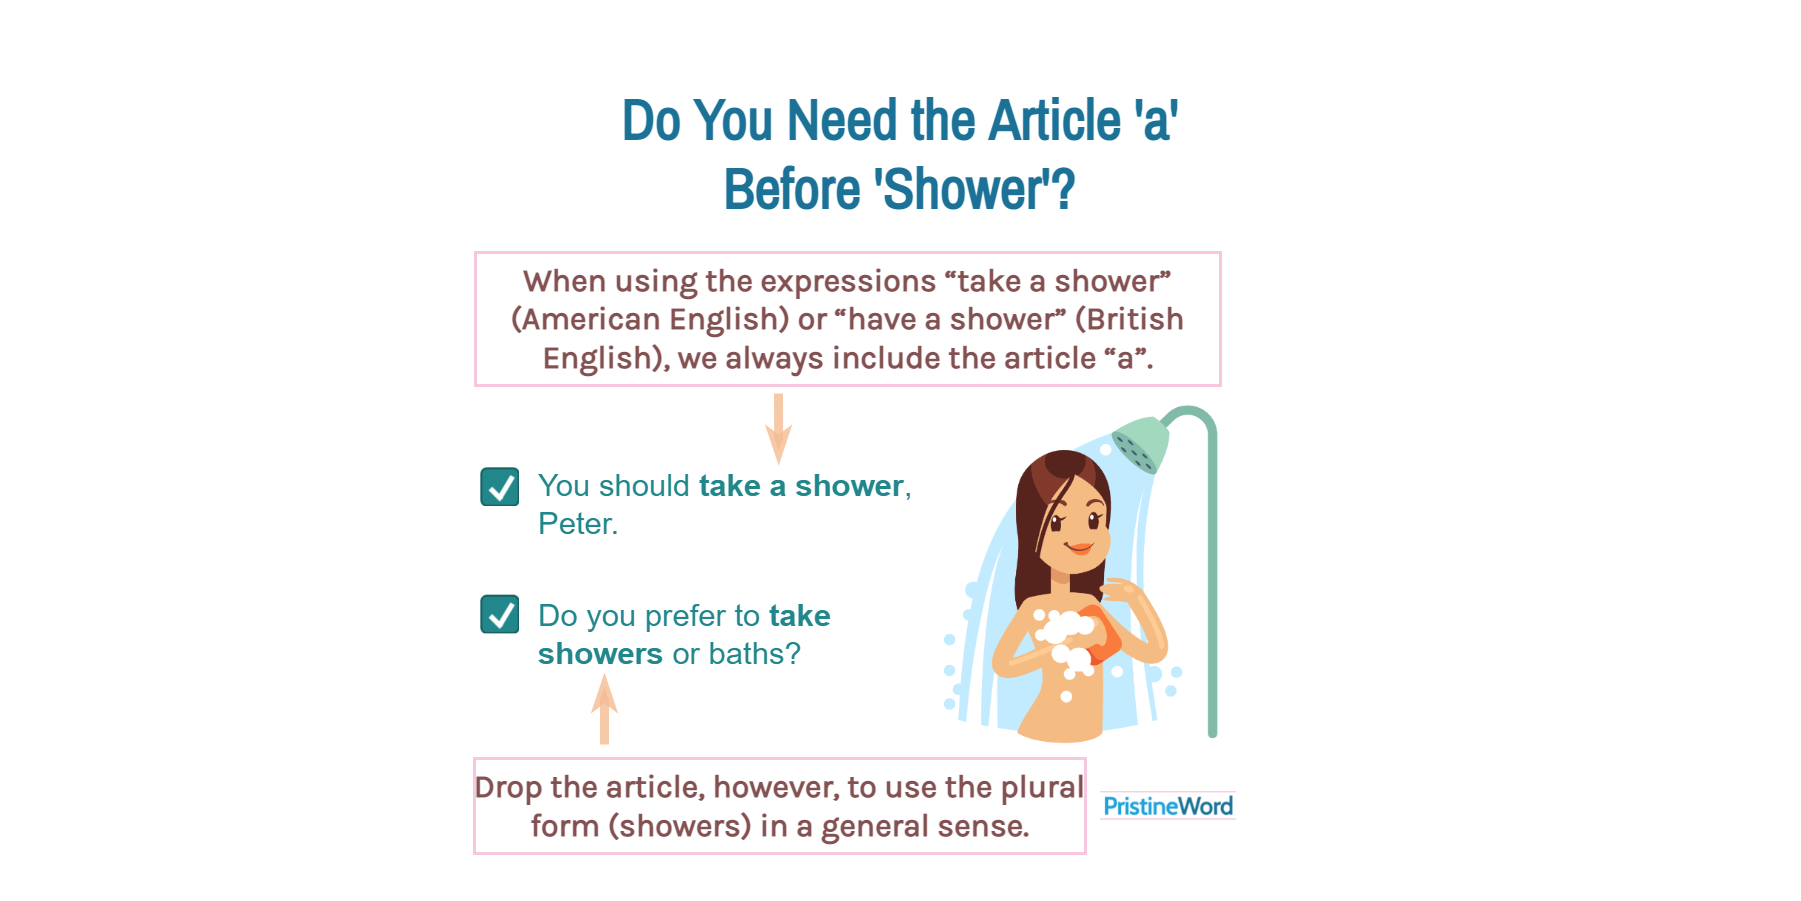 Do You Need the Article ‘a’ Before ‘Shower’?